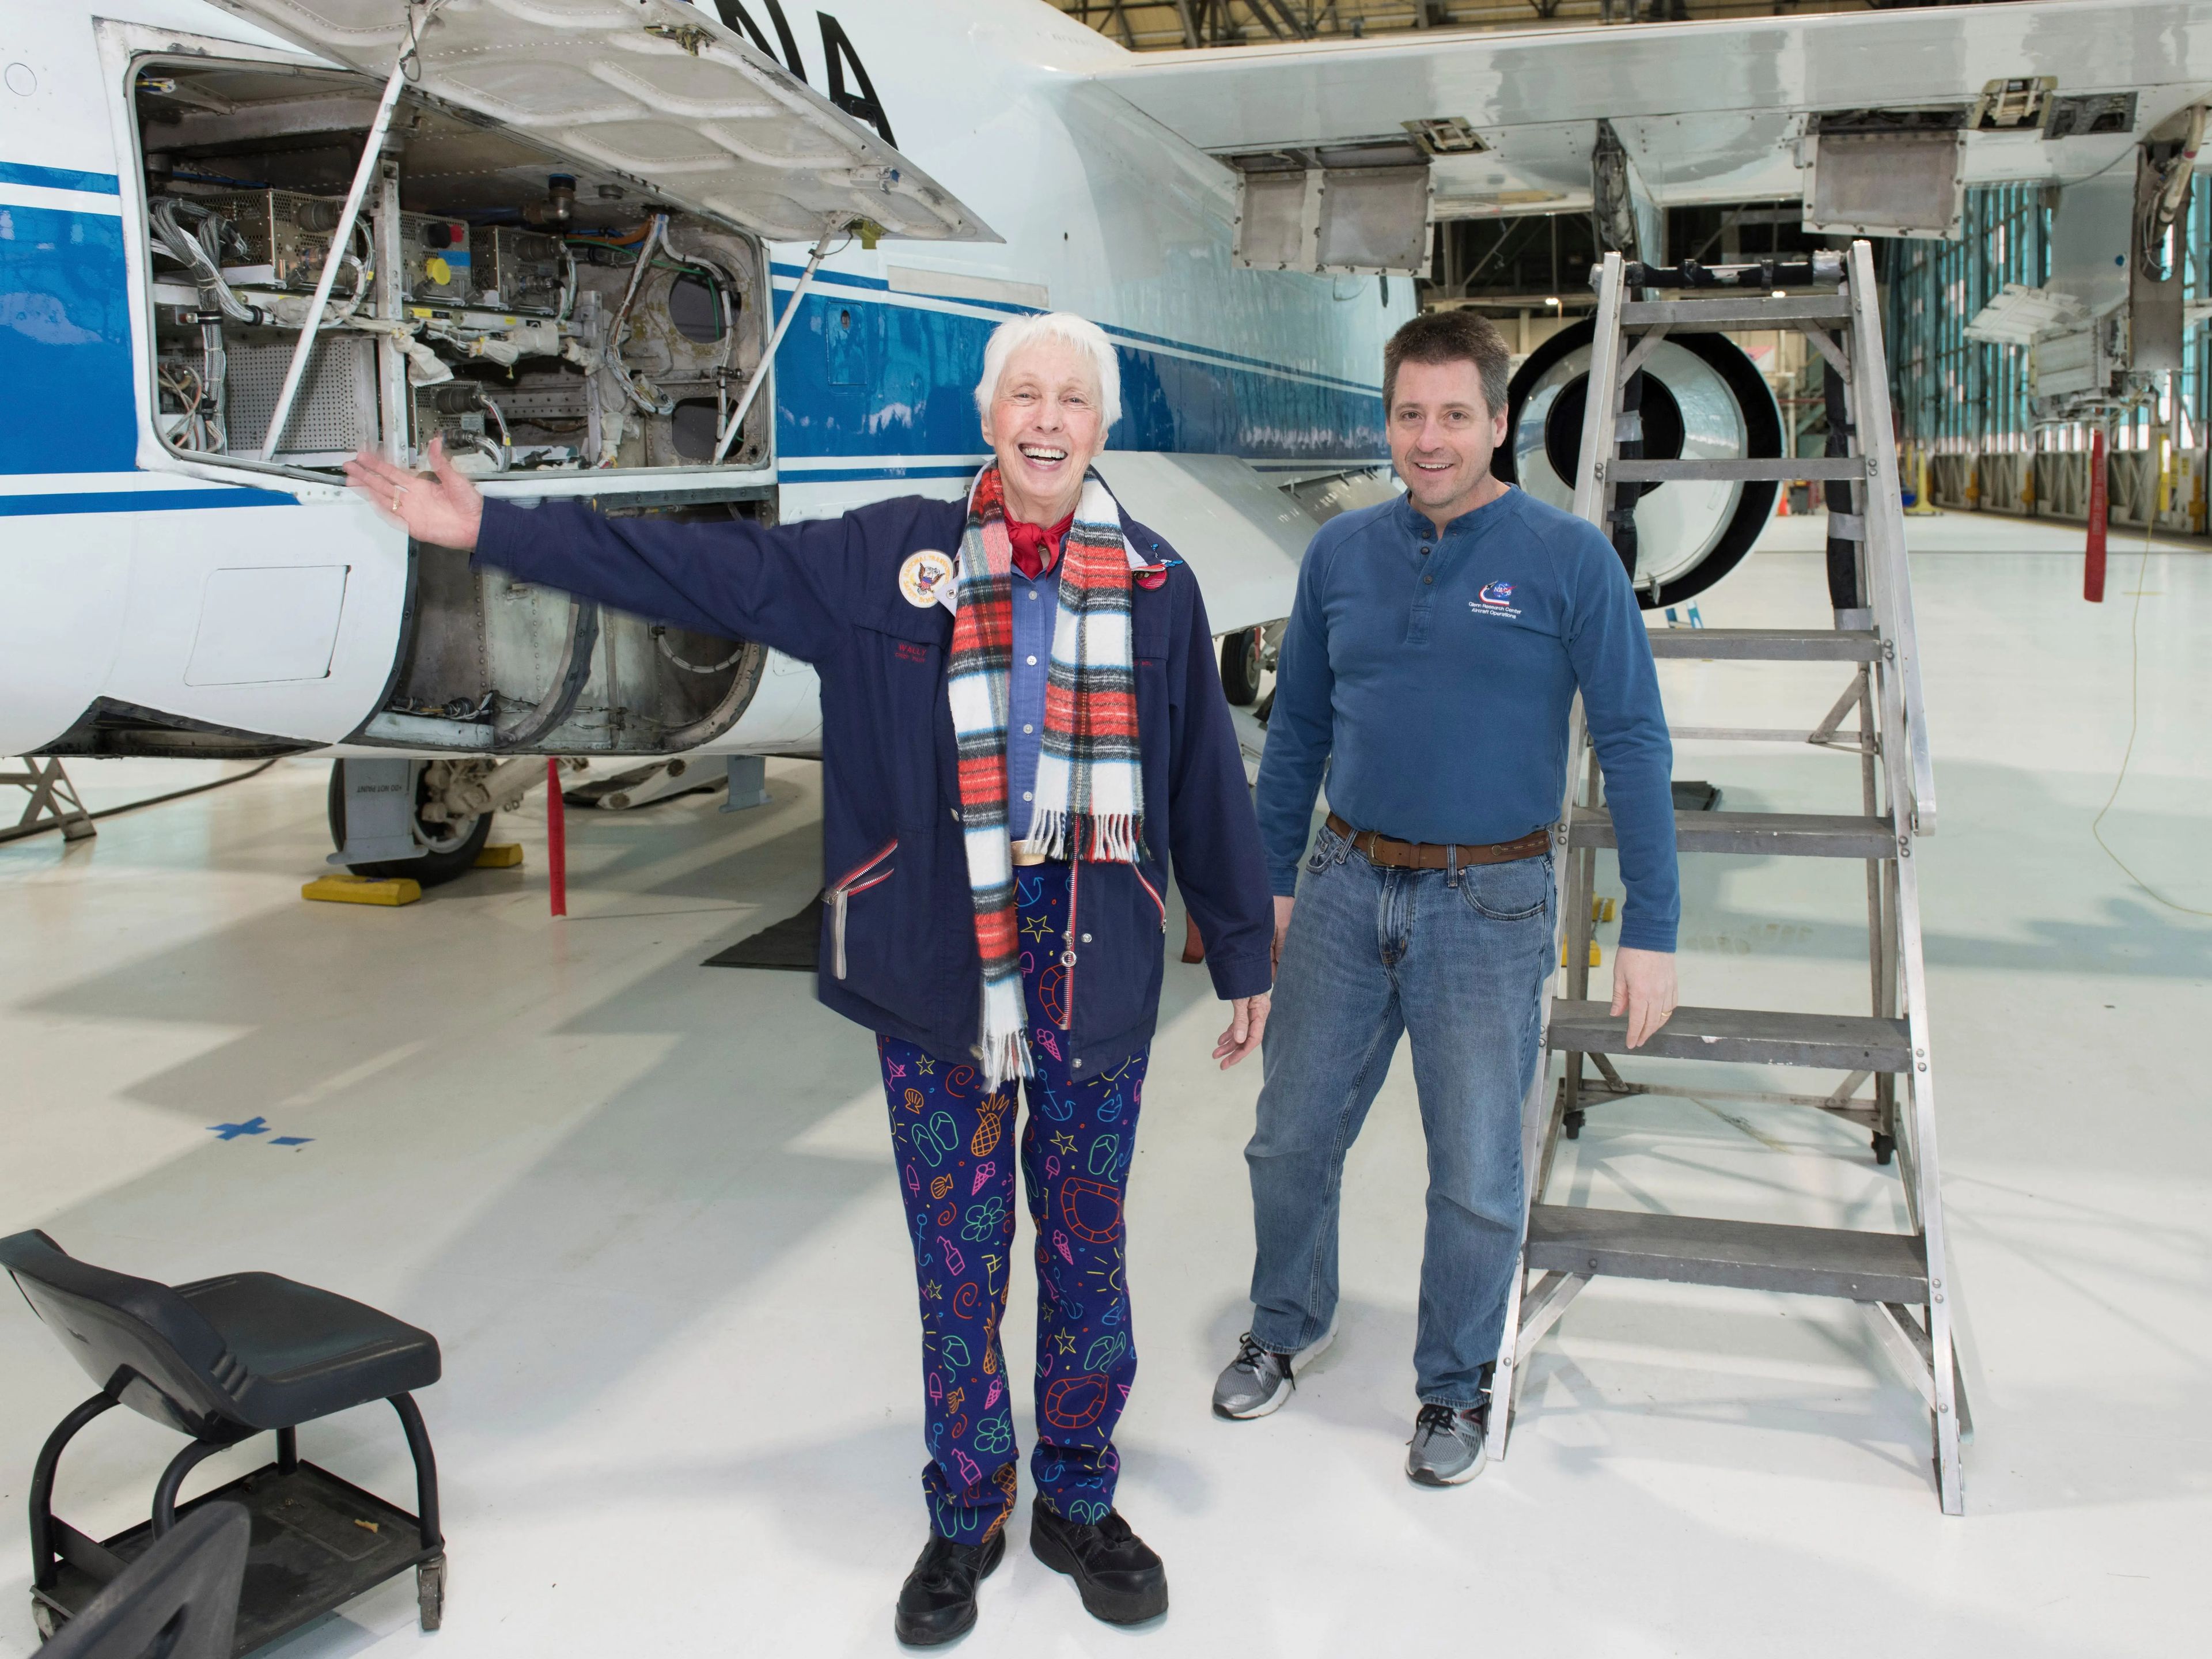 Wally Funk and a man stand near an airplane